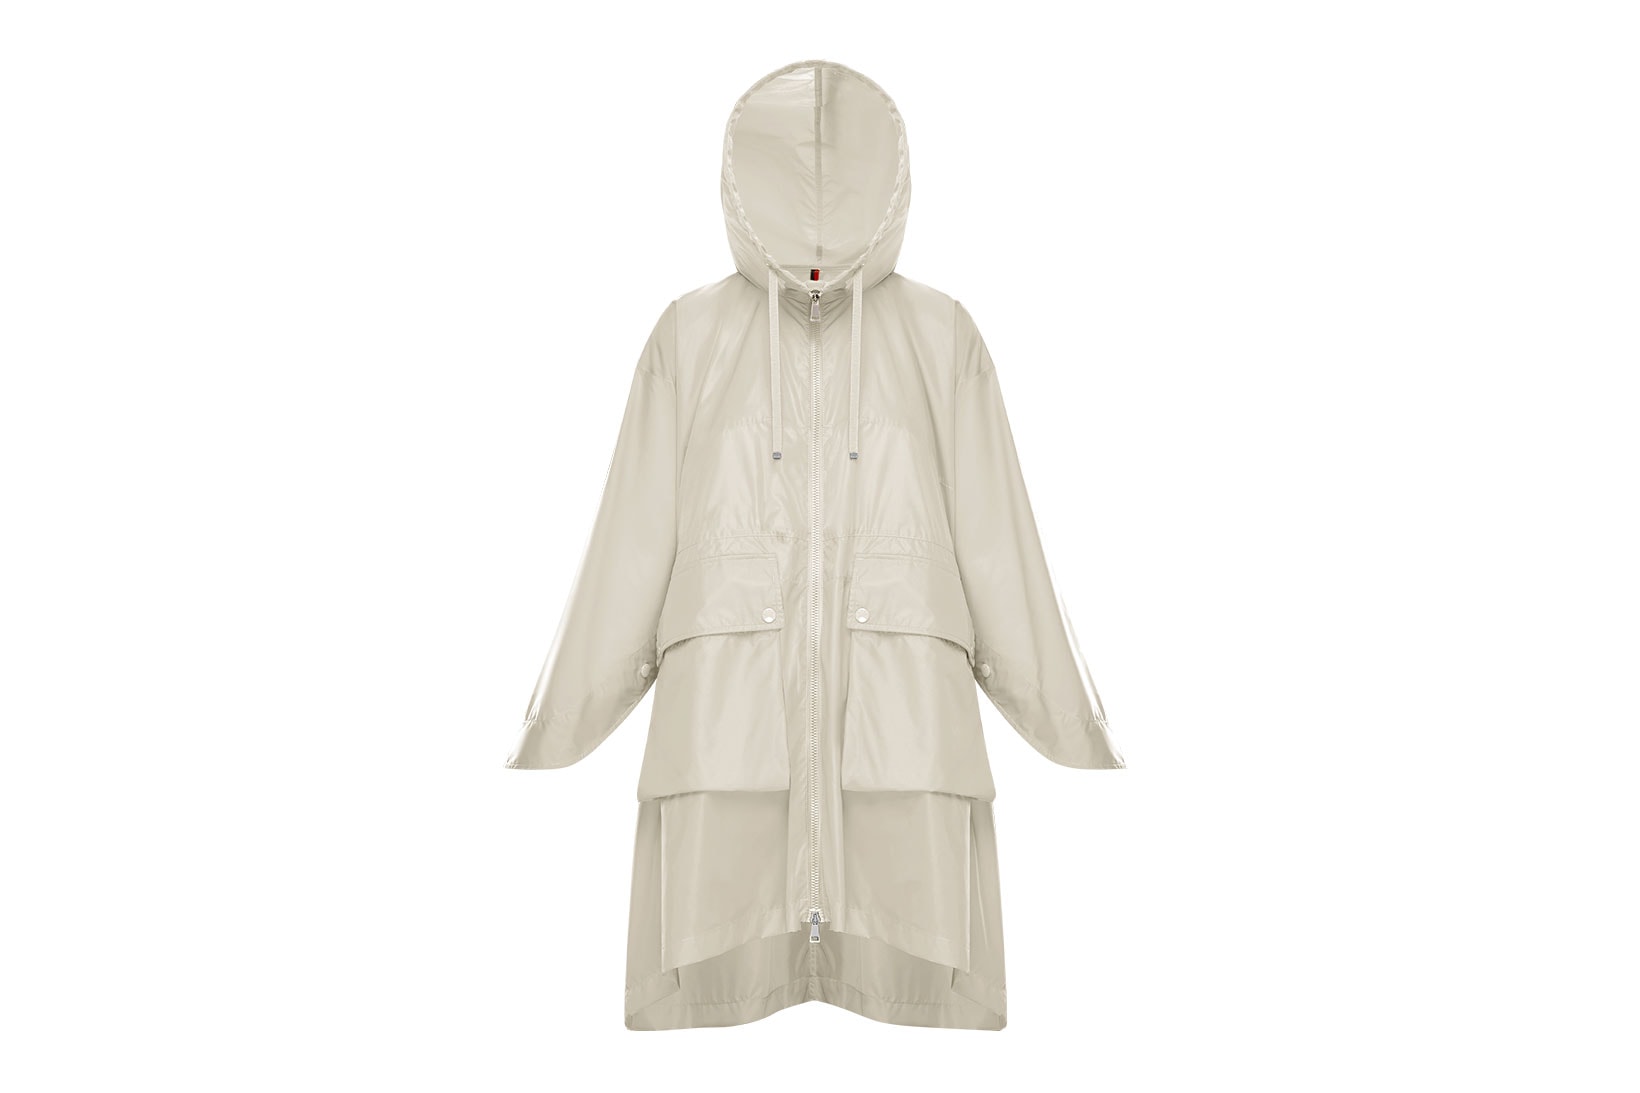 moncler womenswer the freshener ss21 spring summer 2021 collection jacket parka